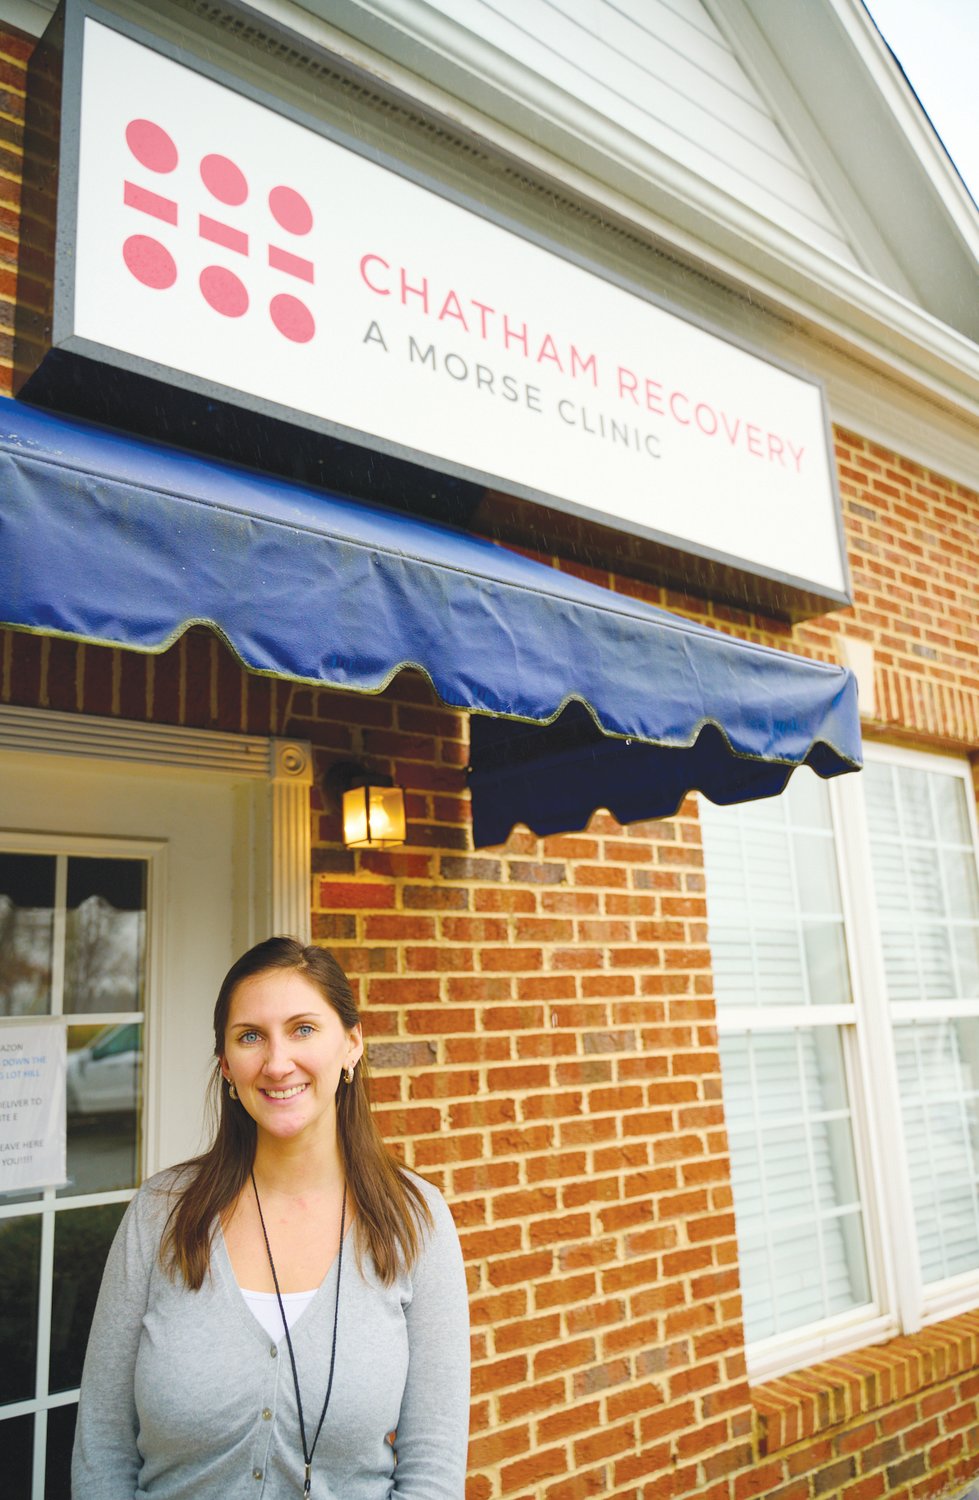 Danielle Minges is the director of Chatham Recovery, an opioid use disorder treatment facility.